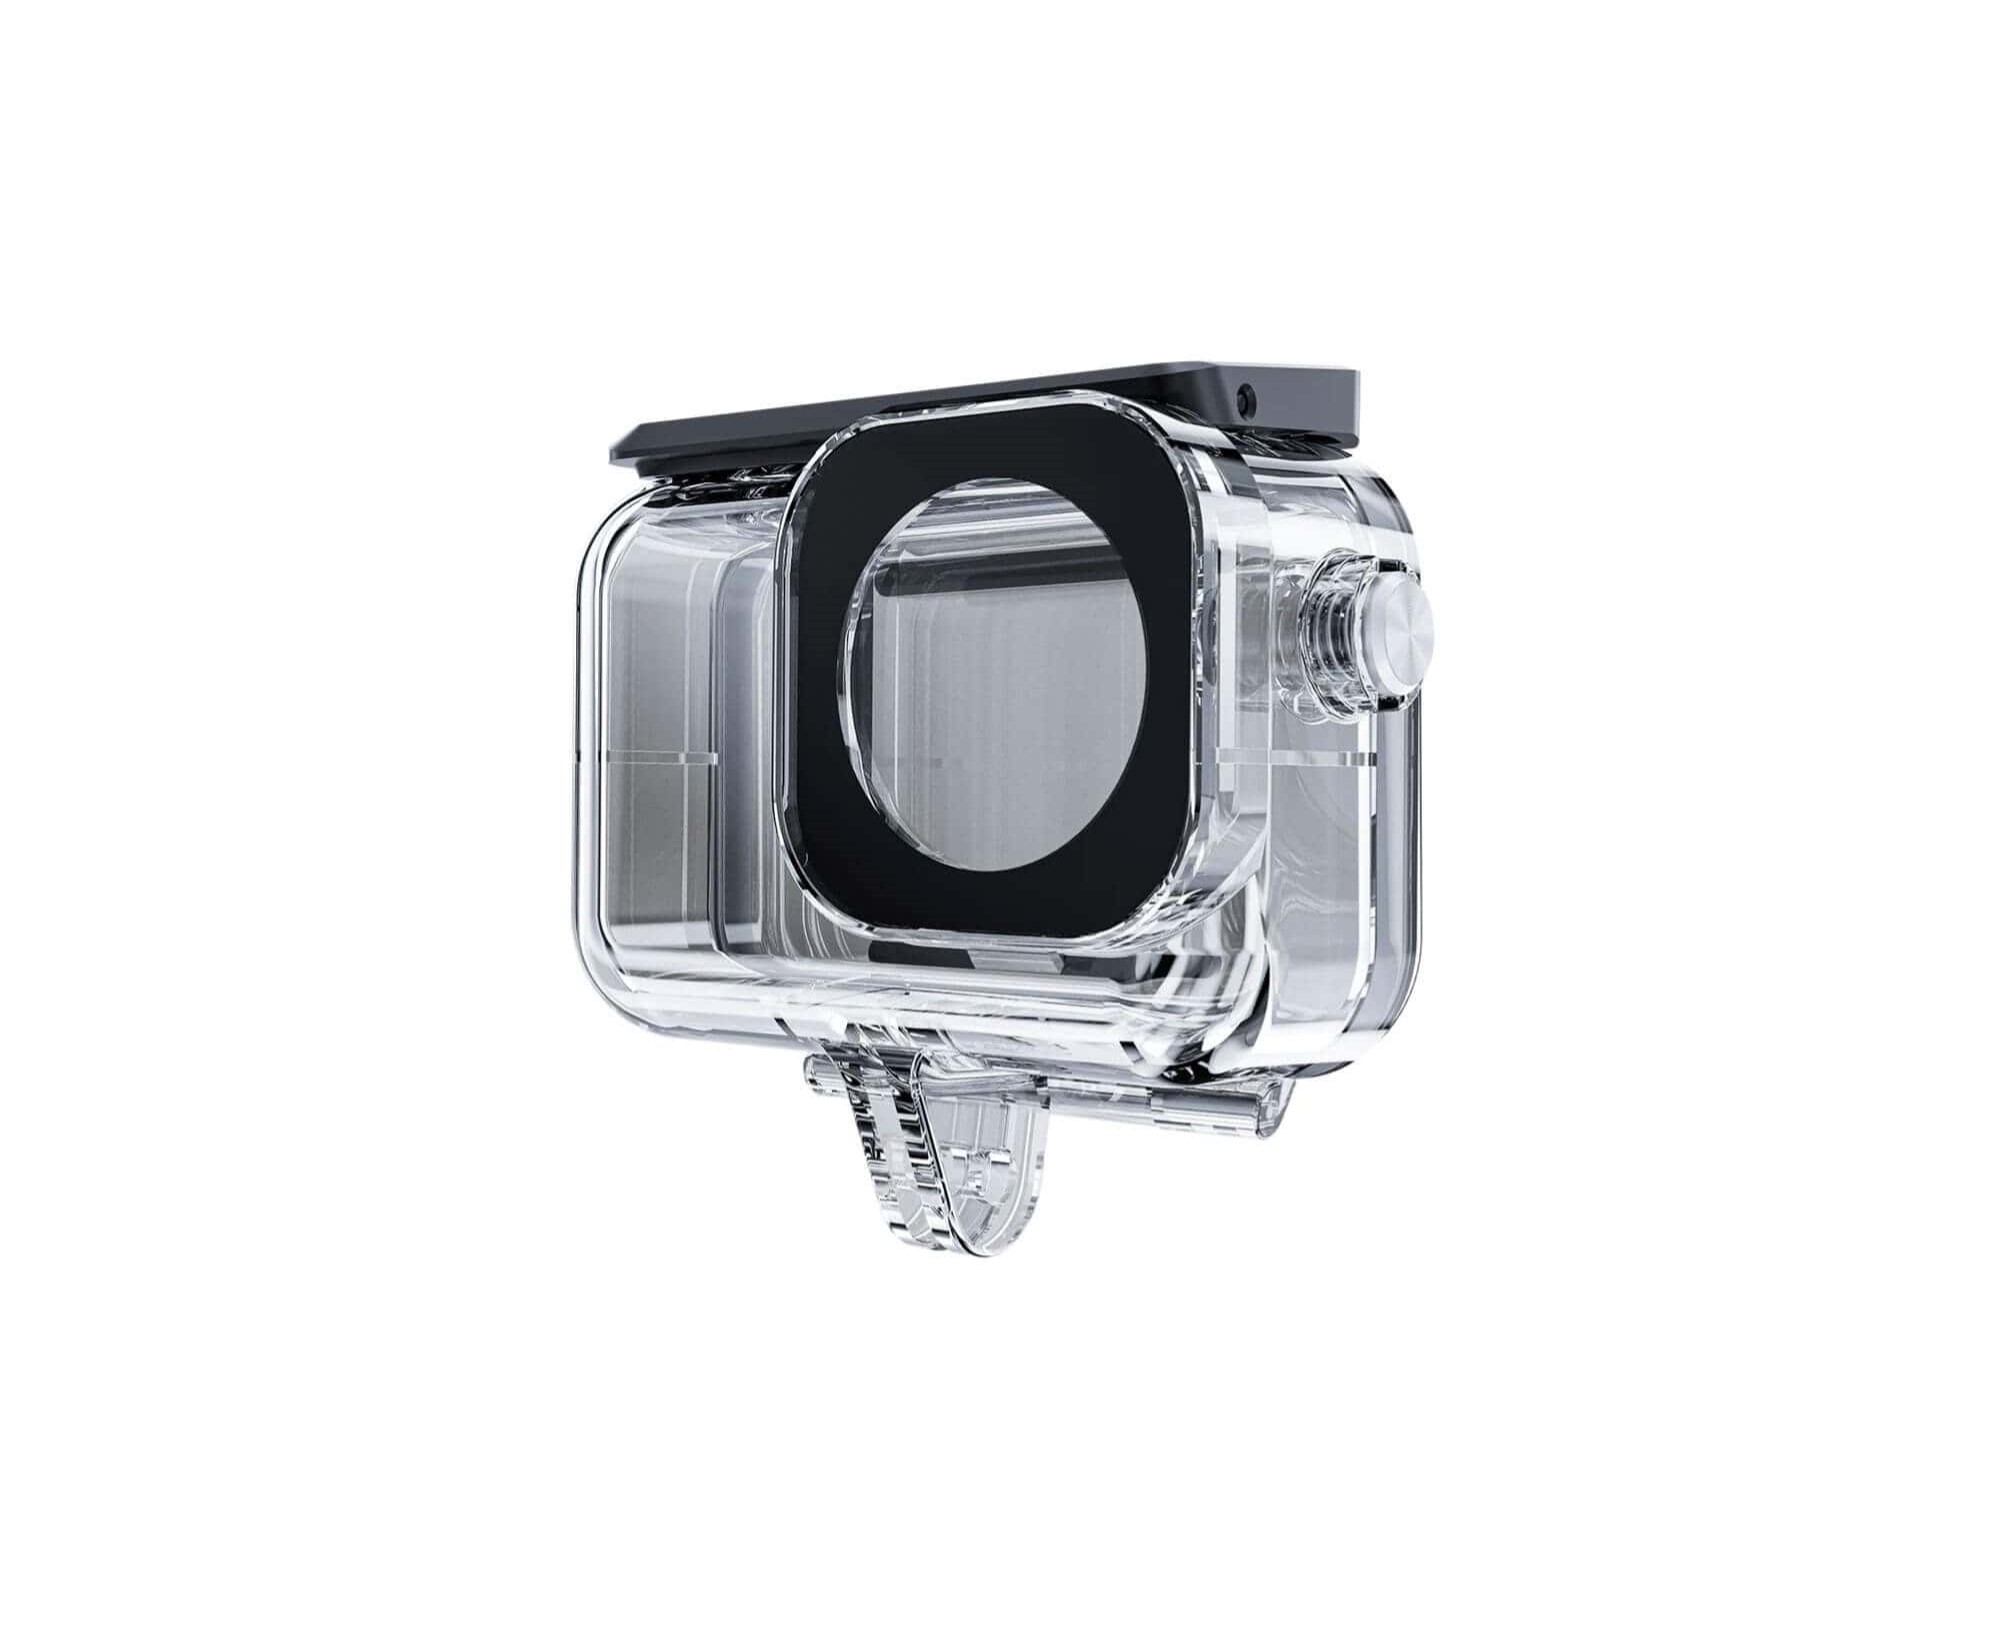 How To Remove The Waterproof Case Of Action Camera